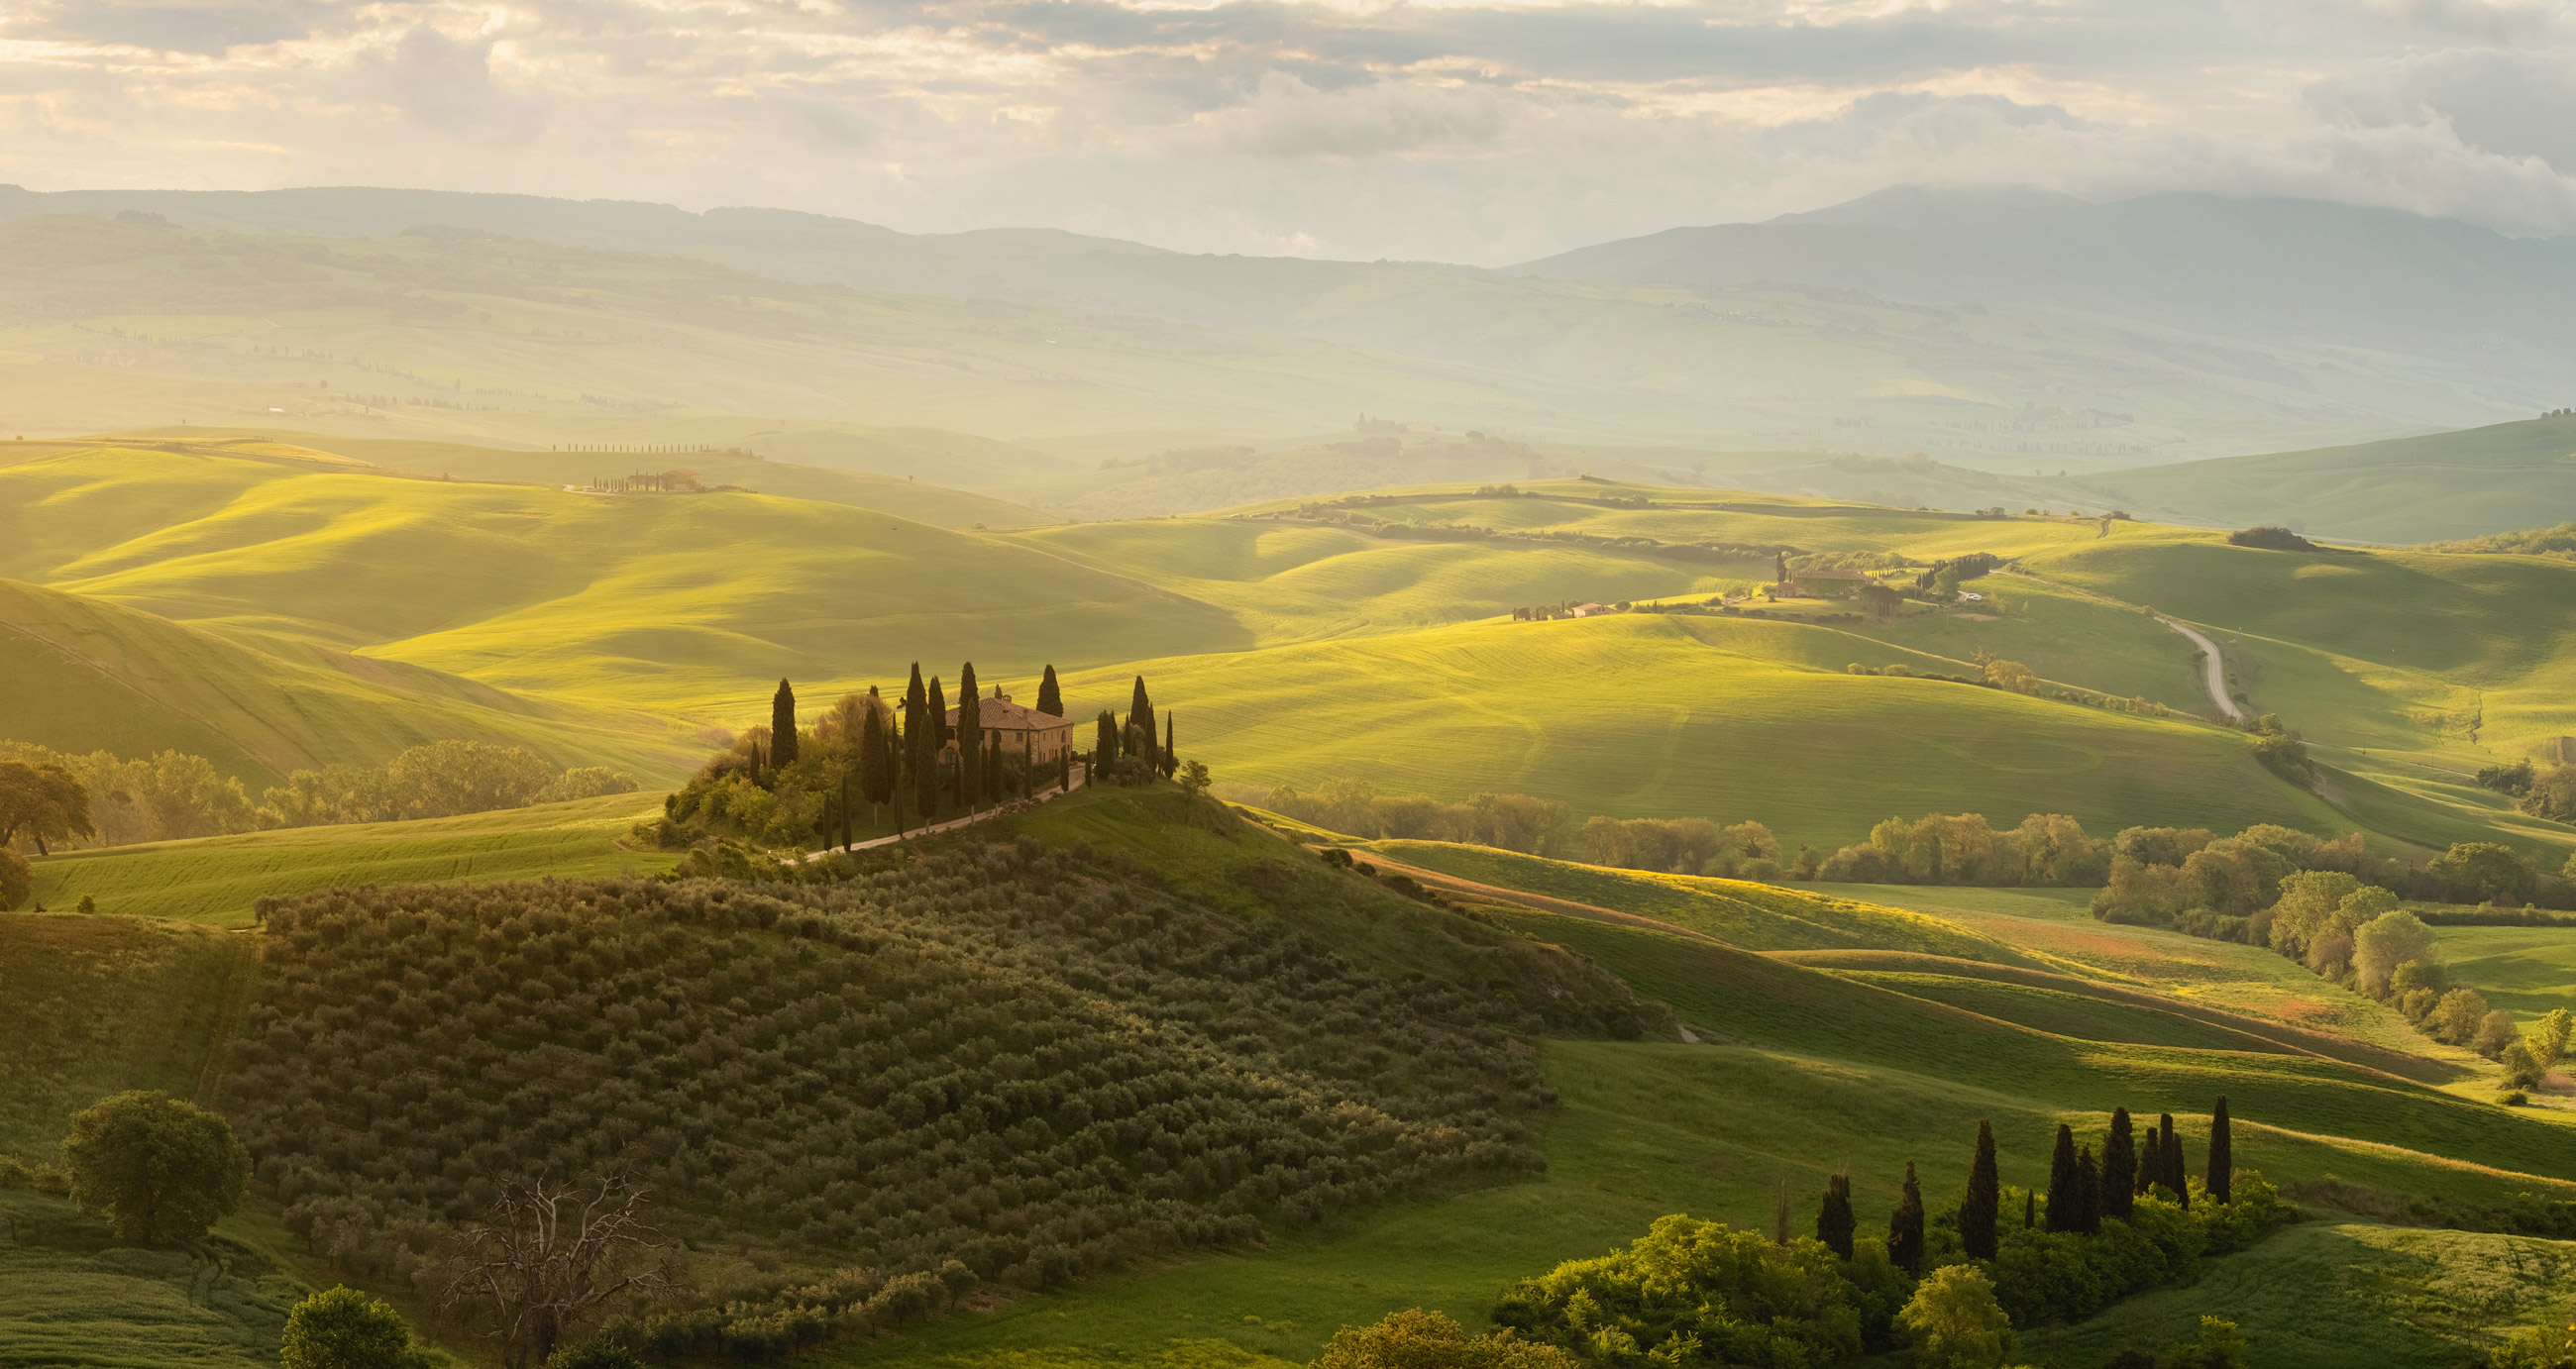 VAL D ORCIA, TUSCANY – MAY 04, 2019: Spring panorama of the most